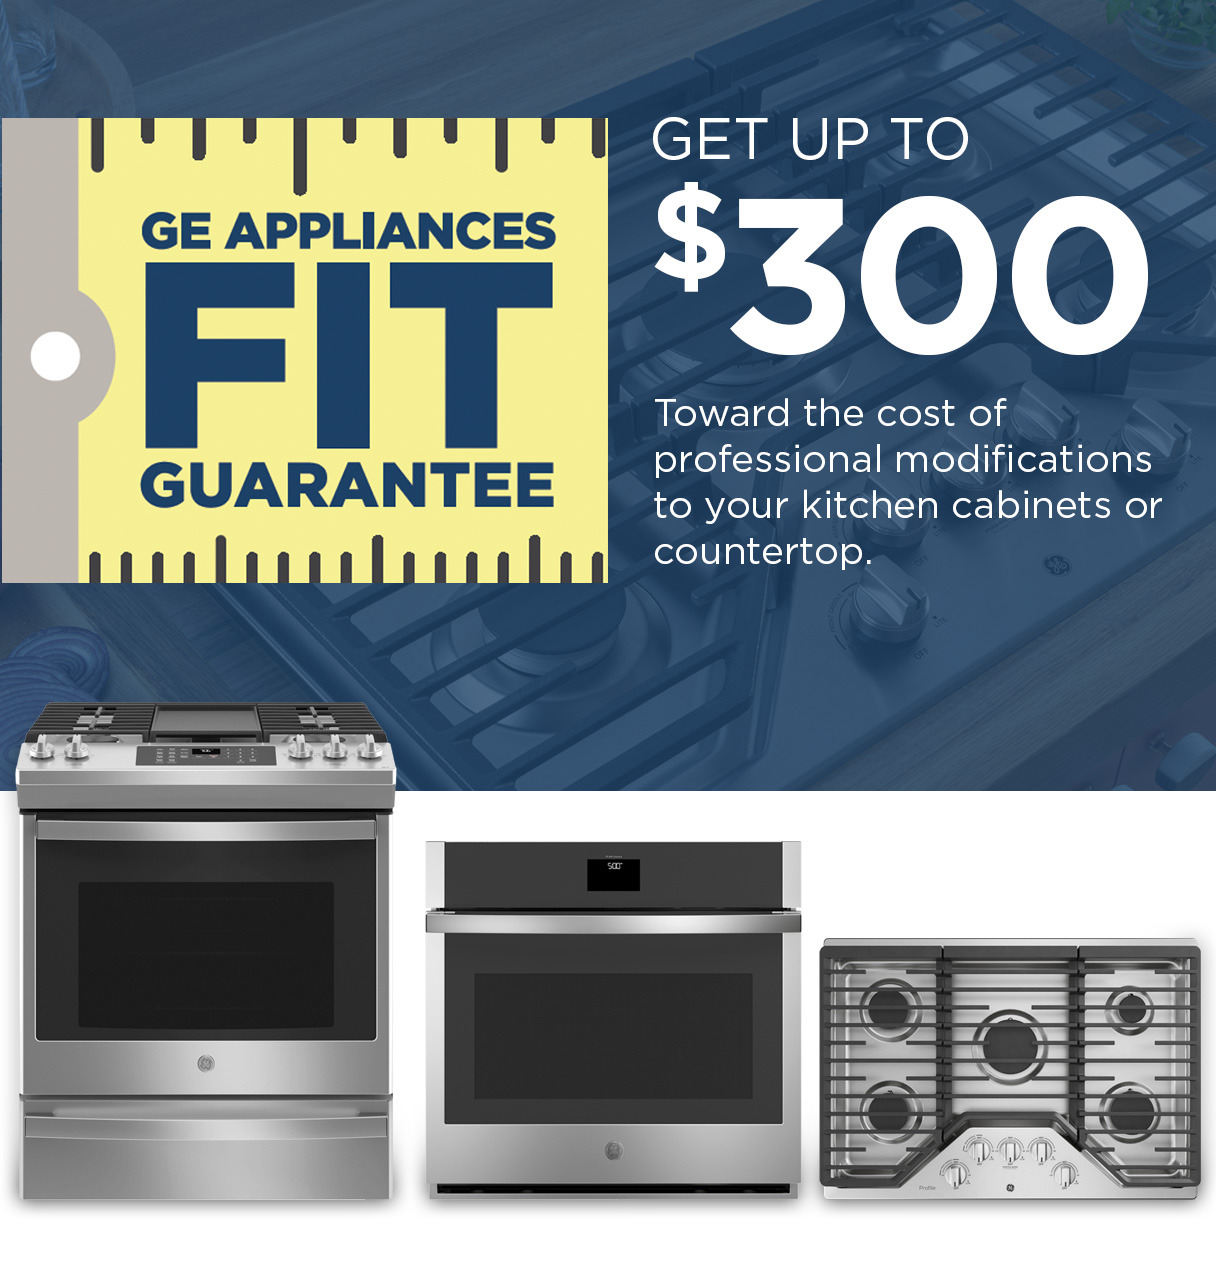 Get up to $300 toward the cost of professional modifications to your cabinets and countertops